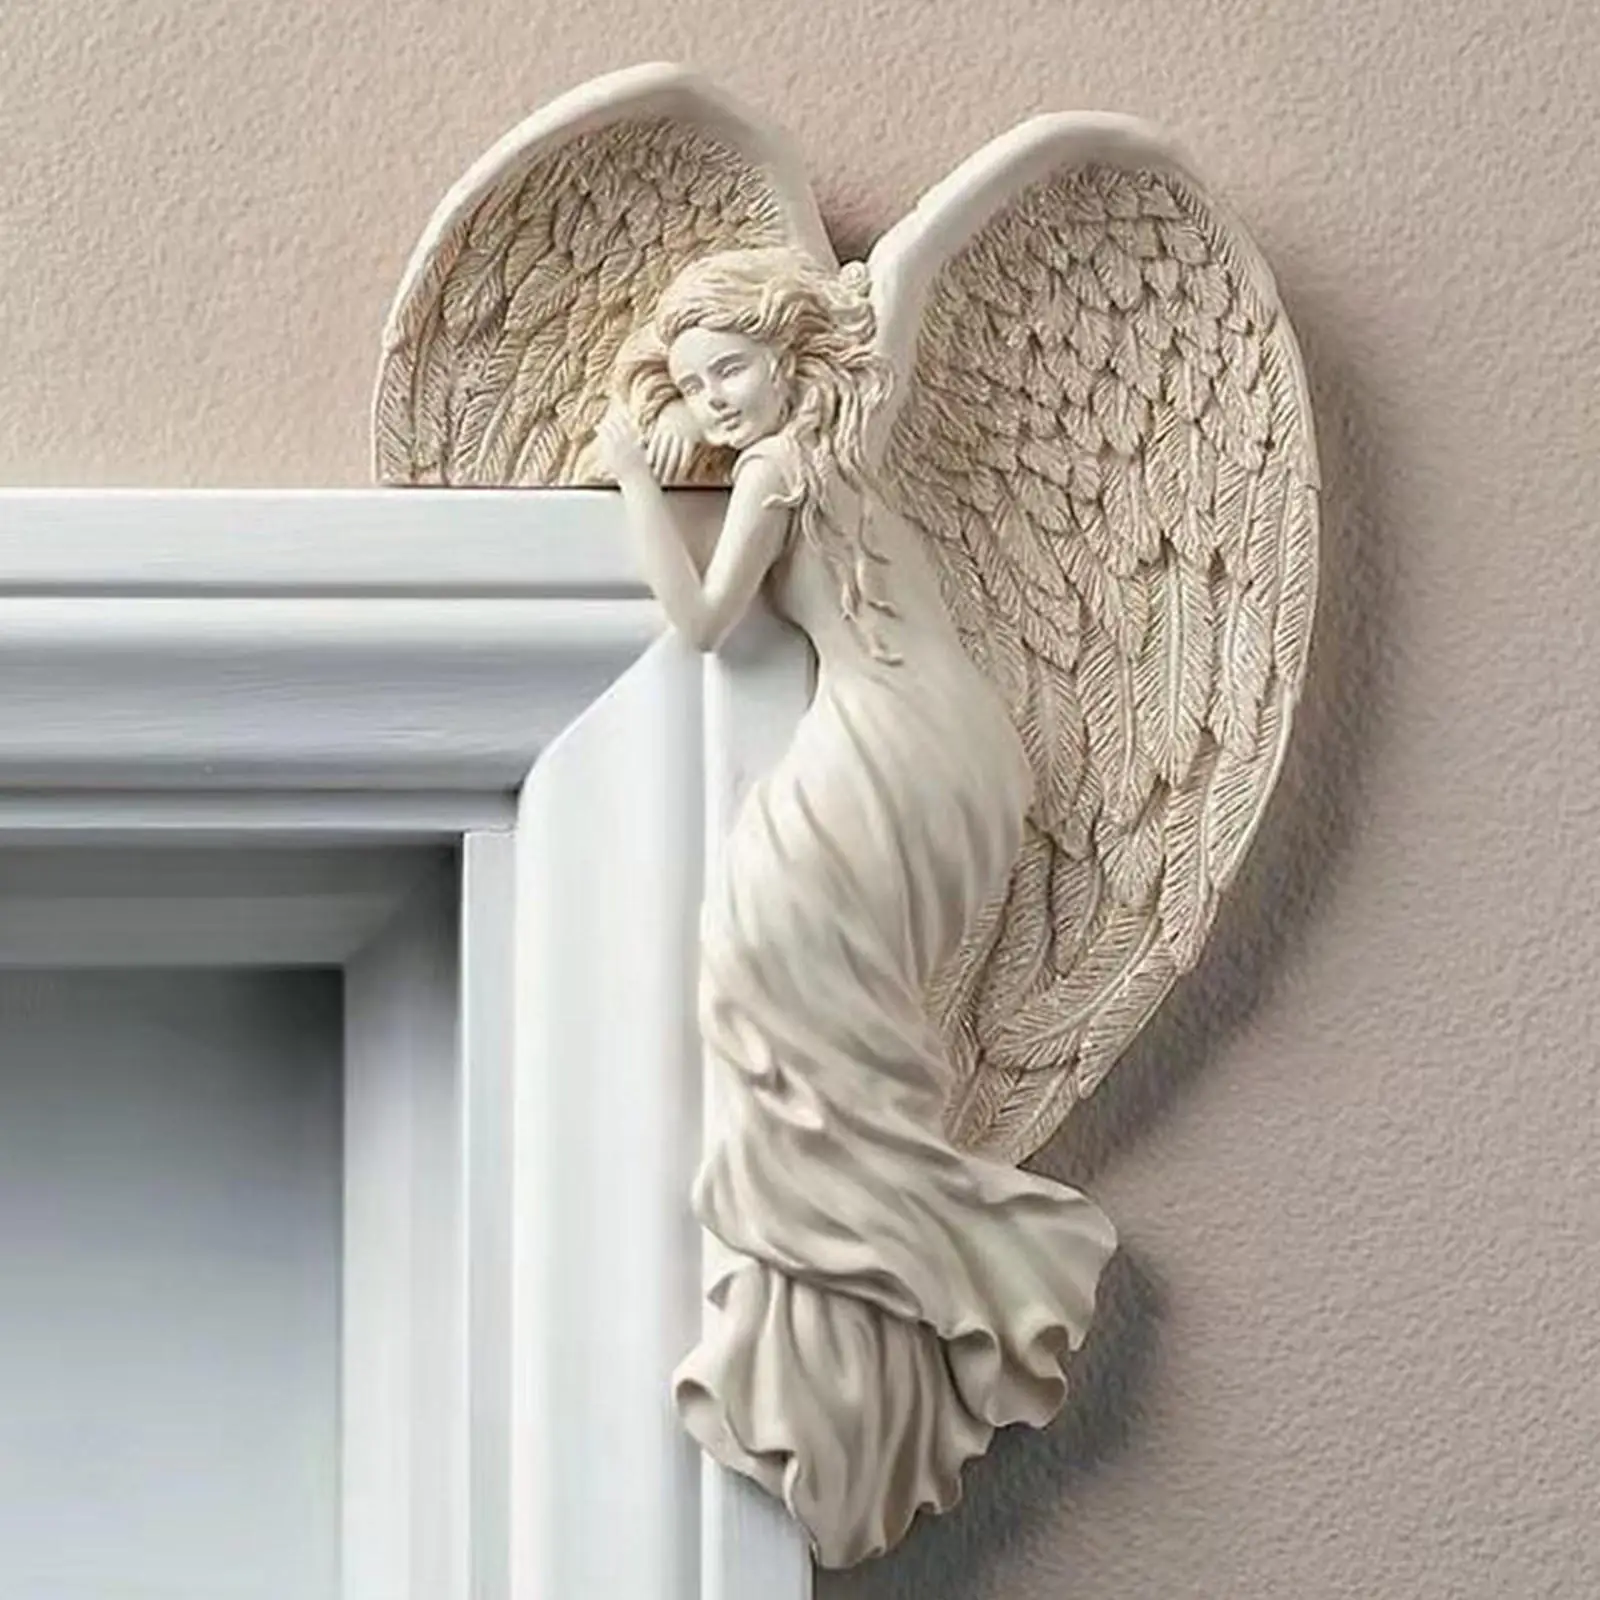 Angel Wall Decoration, Antique Hanging Resin Angel Wings, Wall Art Décor Sculpture for Home Bedroom Living Room Garden Fairy